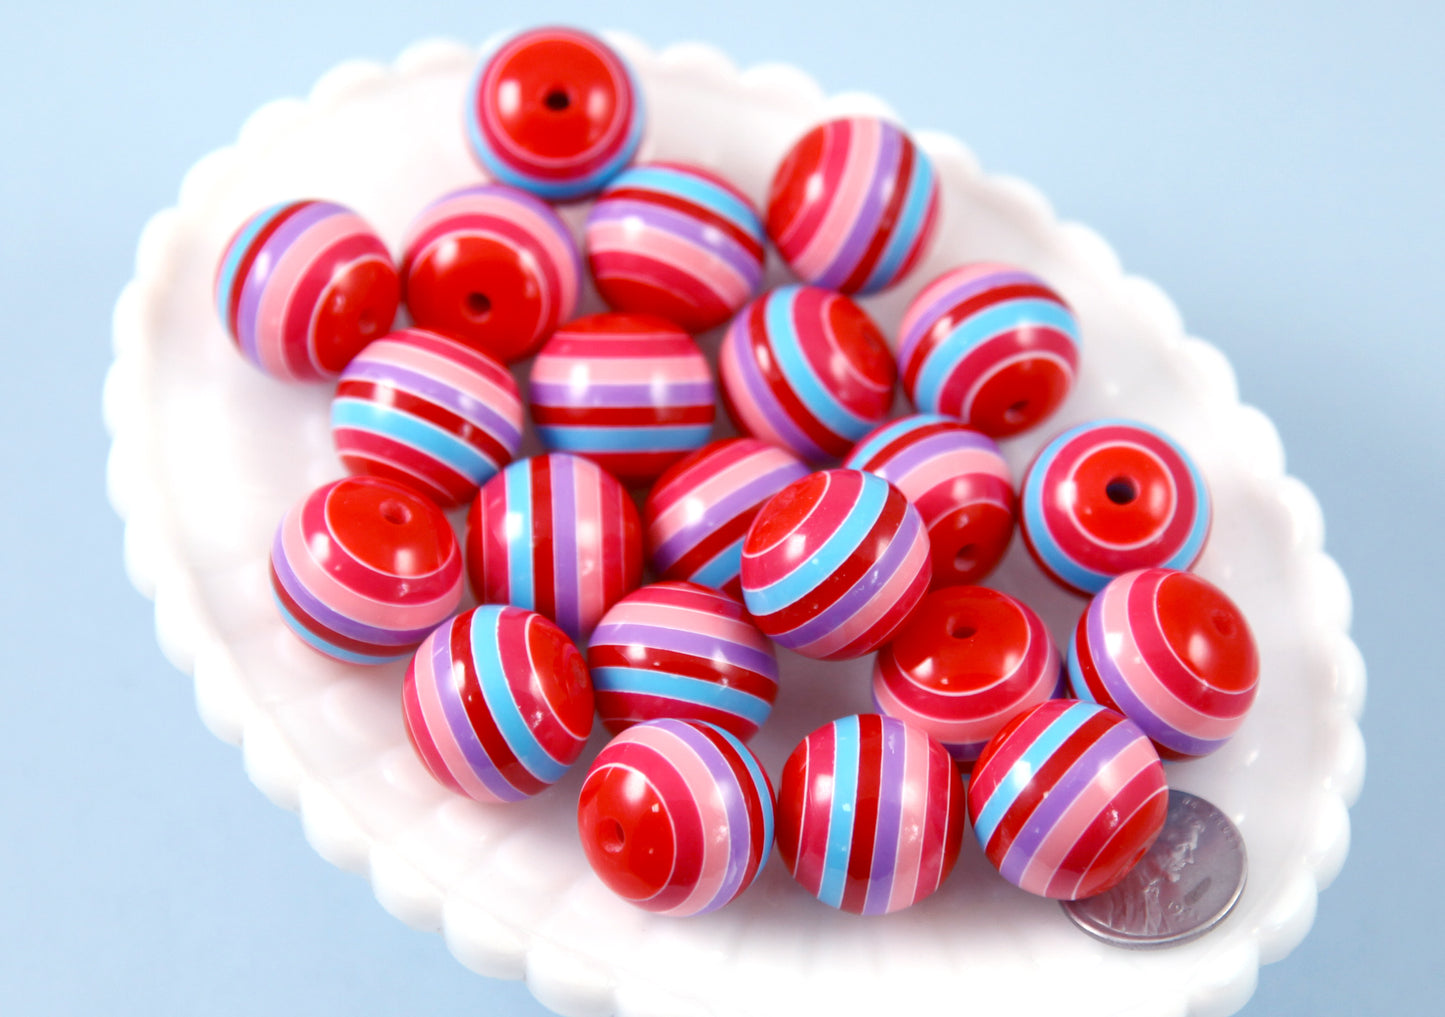 Chunky Striped Beads - 20mm Red Pink Purple Blue Mix Stripes Resin Beads - 12 pc set